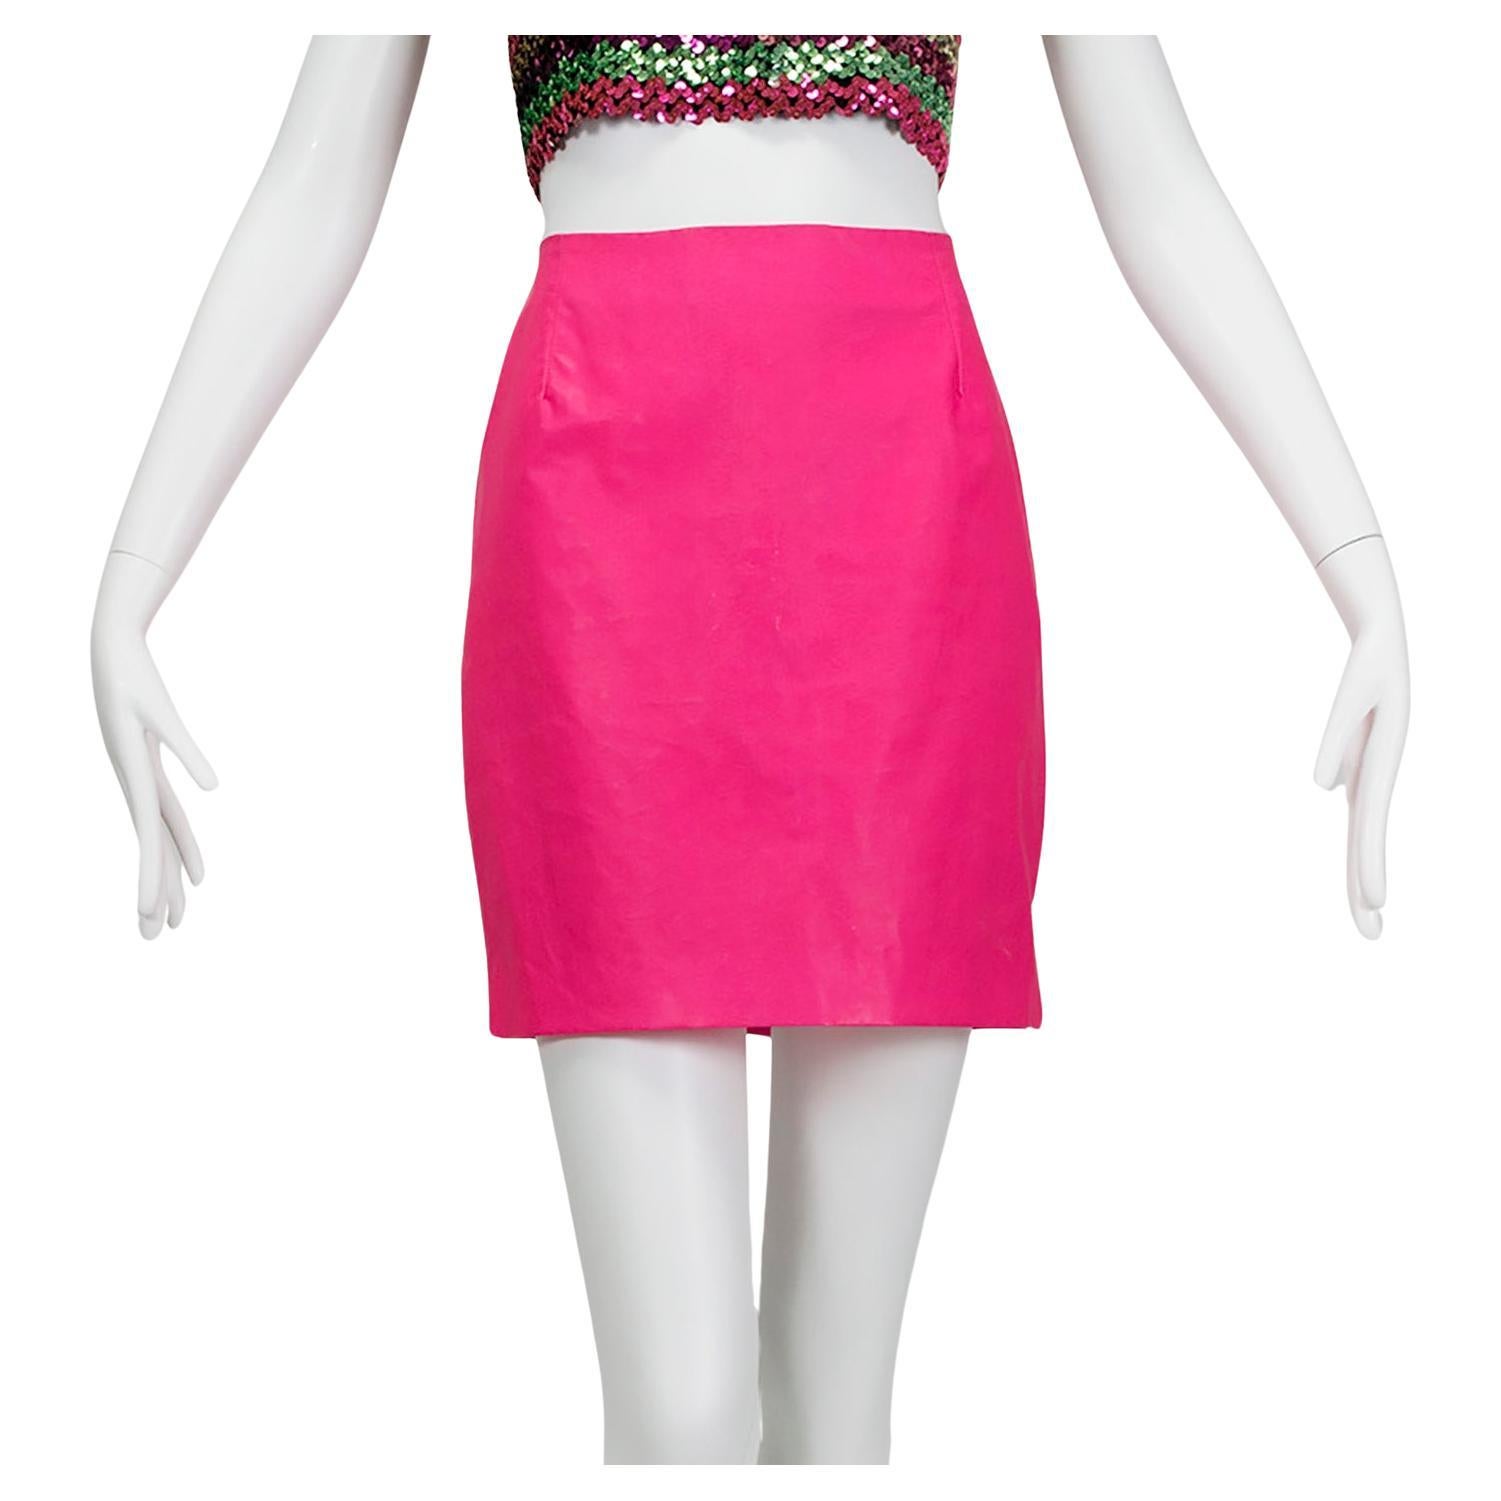 Versace Barbiecore Hot Pink Waxed Vegan Leather Mini Skirt - M, 1990s For Sale